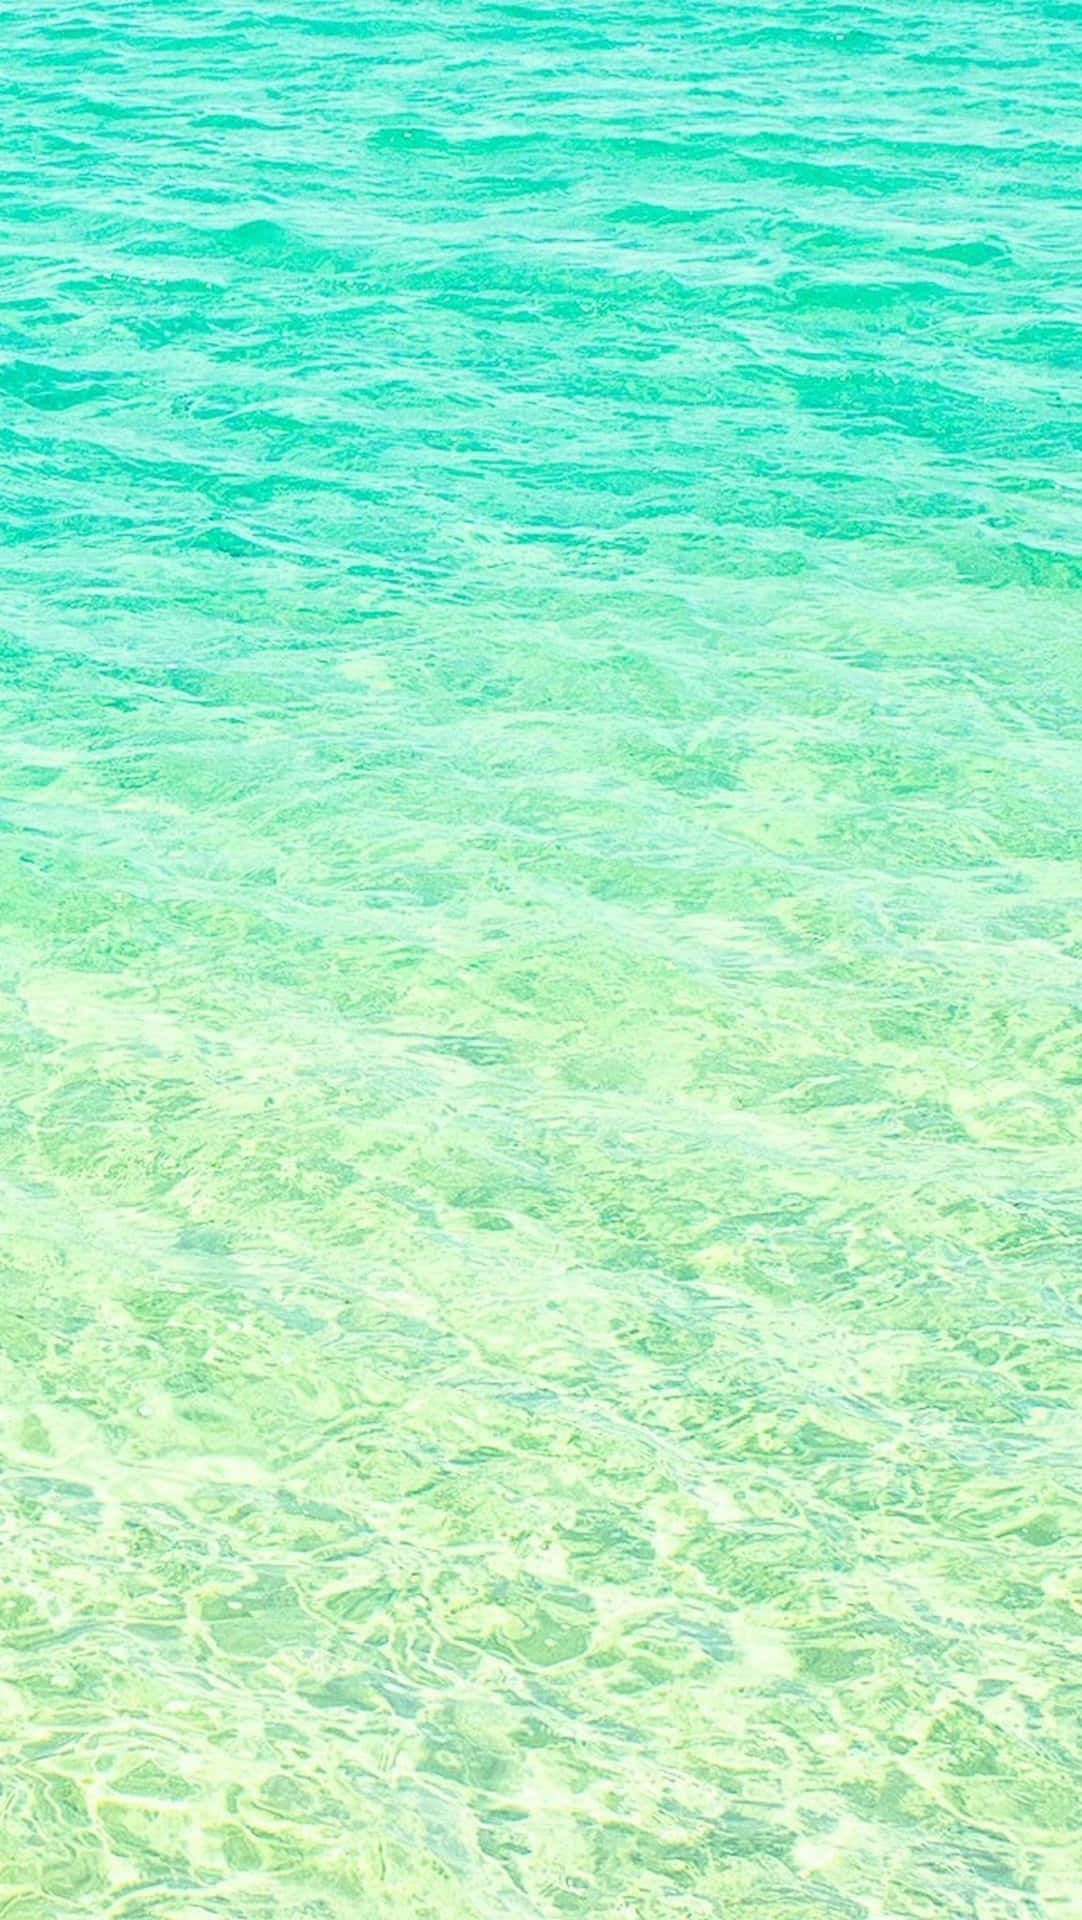 IPhone wallpaper of a beautiful turquoise sea with waves - Aqua